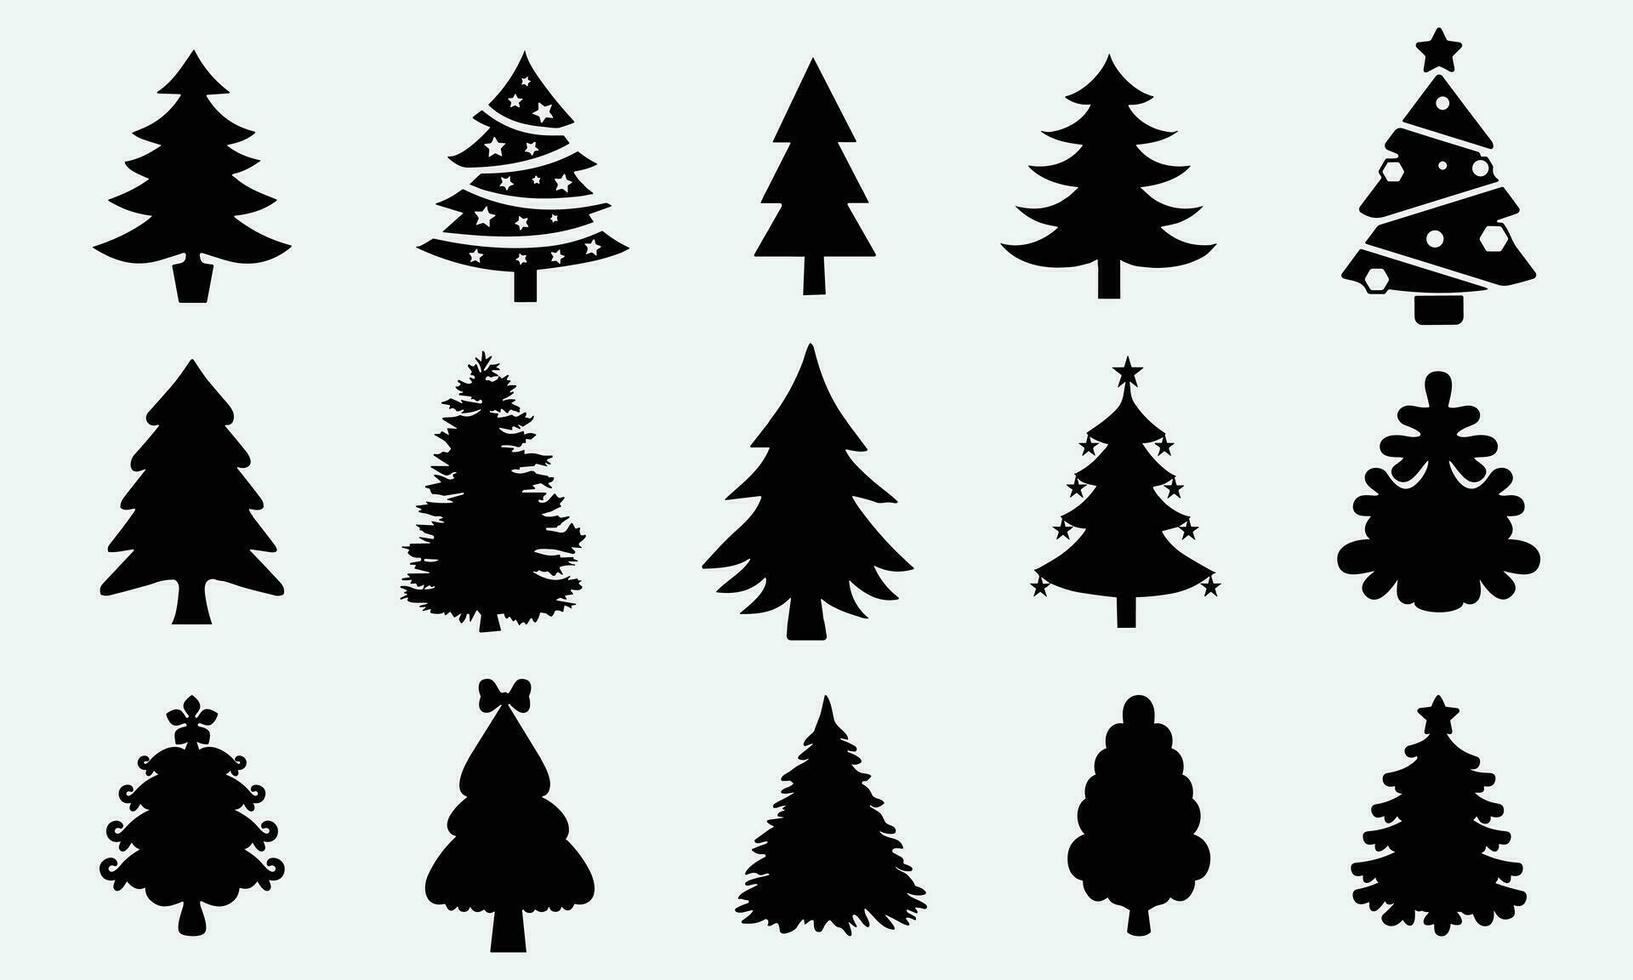 Christmas trees silhouette vector, graphics vector